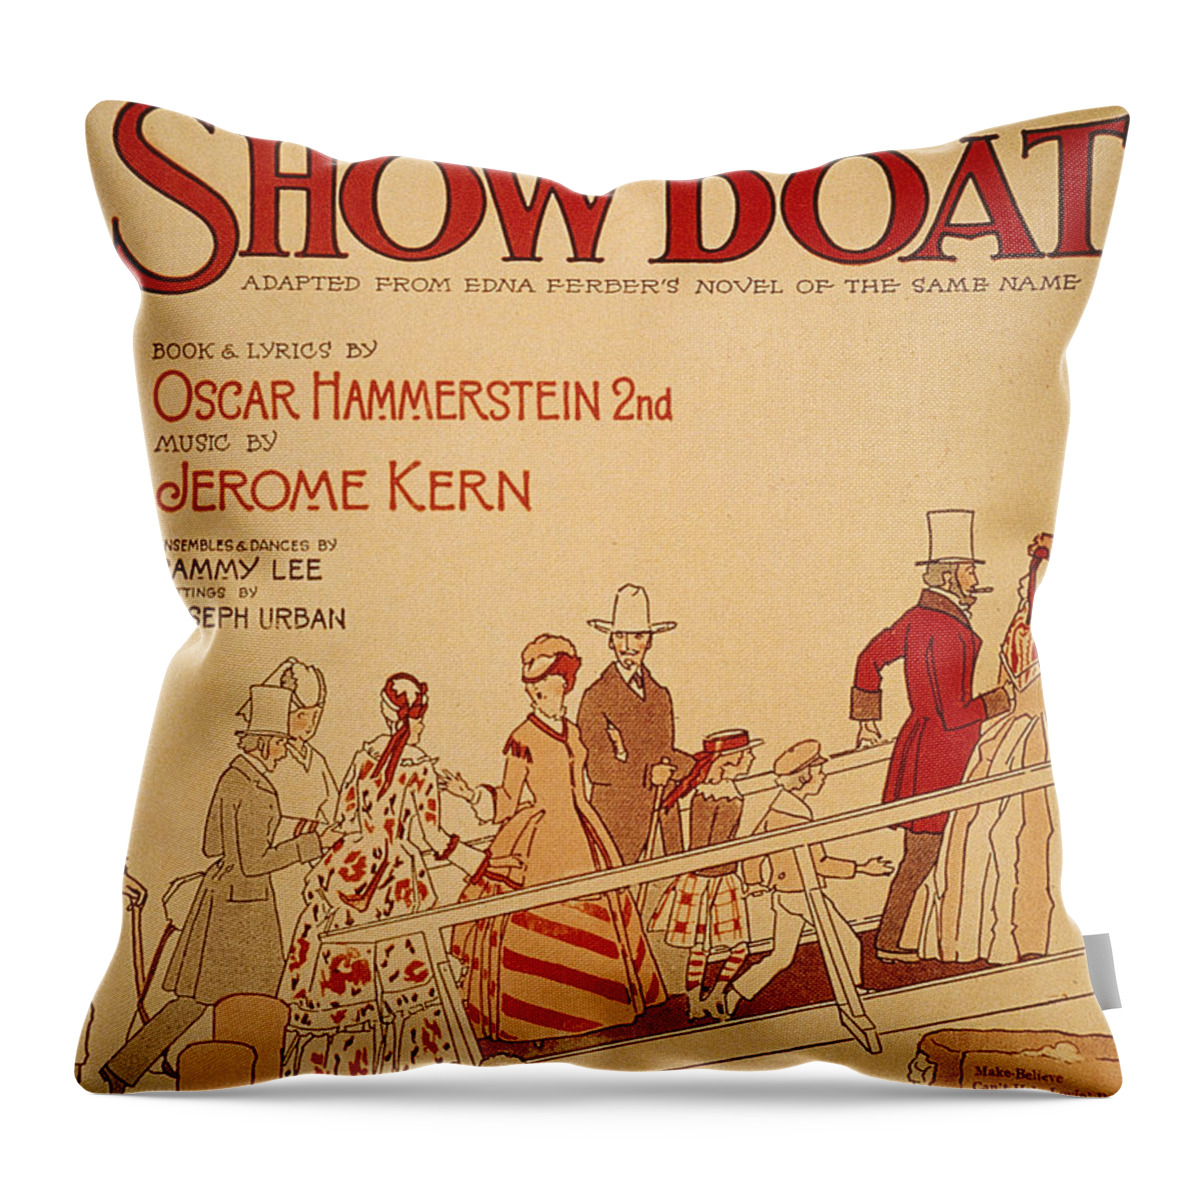 1927 Throw Pillow featuring the painting Show Boat Poster, 1927 by Granger